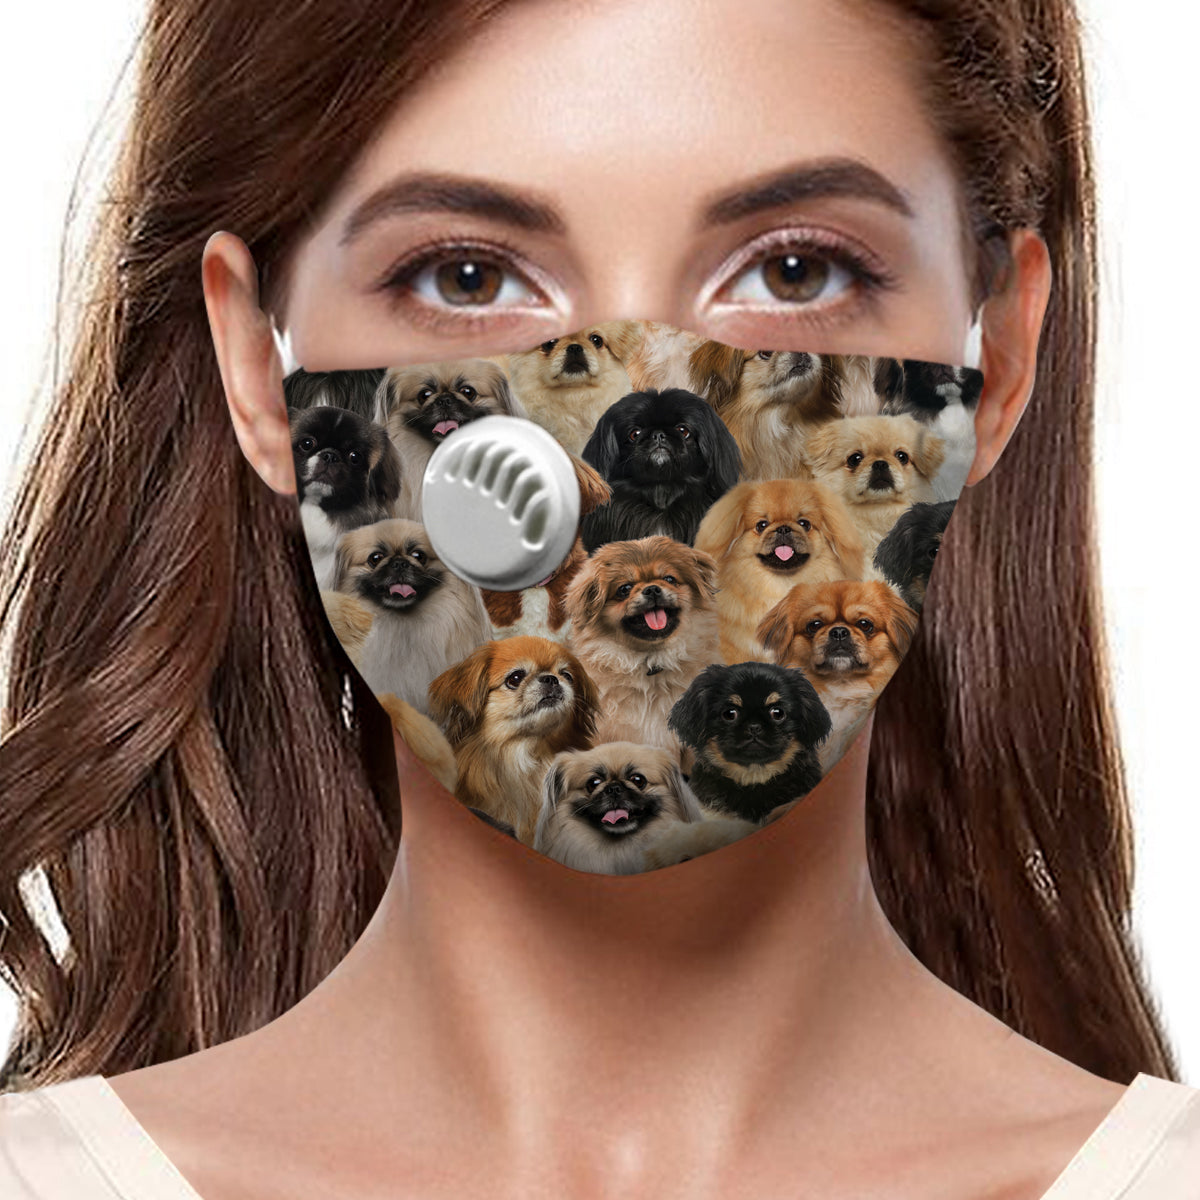 You Will Have A Bunch Of Pekingeses F-Mask